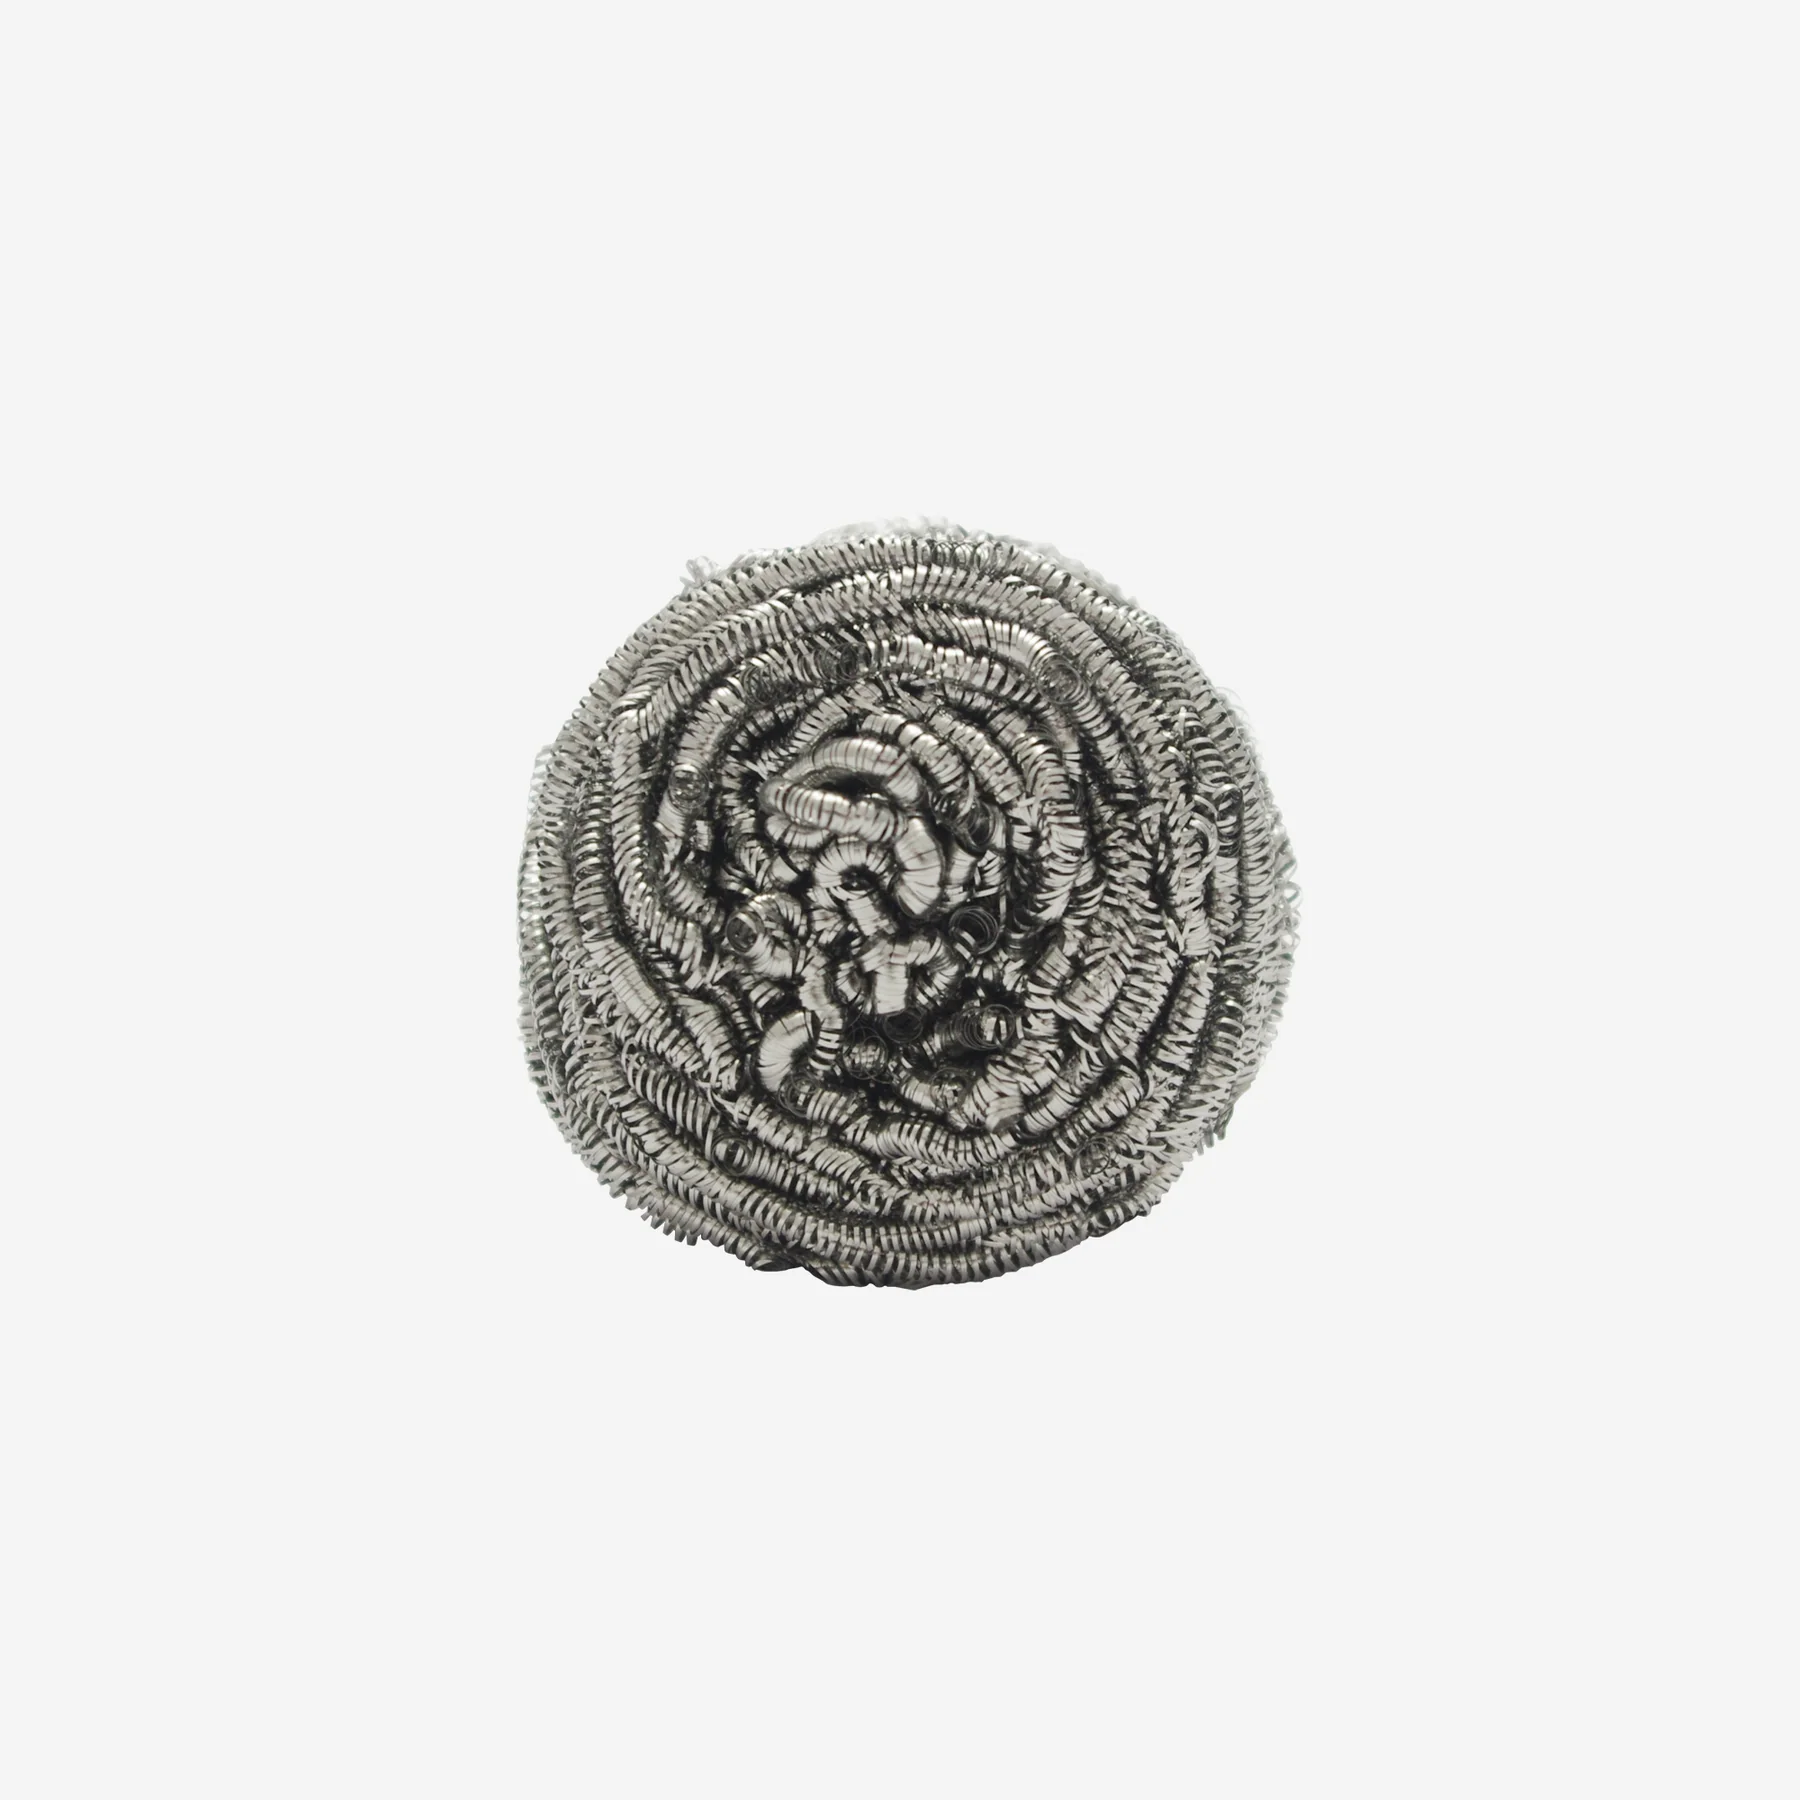 Andrée Jardin Tradition Stainless Steel Scrubber Sponges & Scouring Pads Andrée Jardin Back in stock Brand_Andrée Jardin Home_Household Cleaning Kitchen_Kitchenware andree-jardin-steel-scouring-ball-1816_1800x1800_5d165f4e-ff51-4888-b102-027358b50ce6